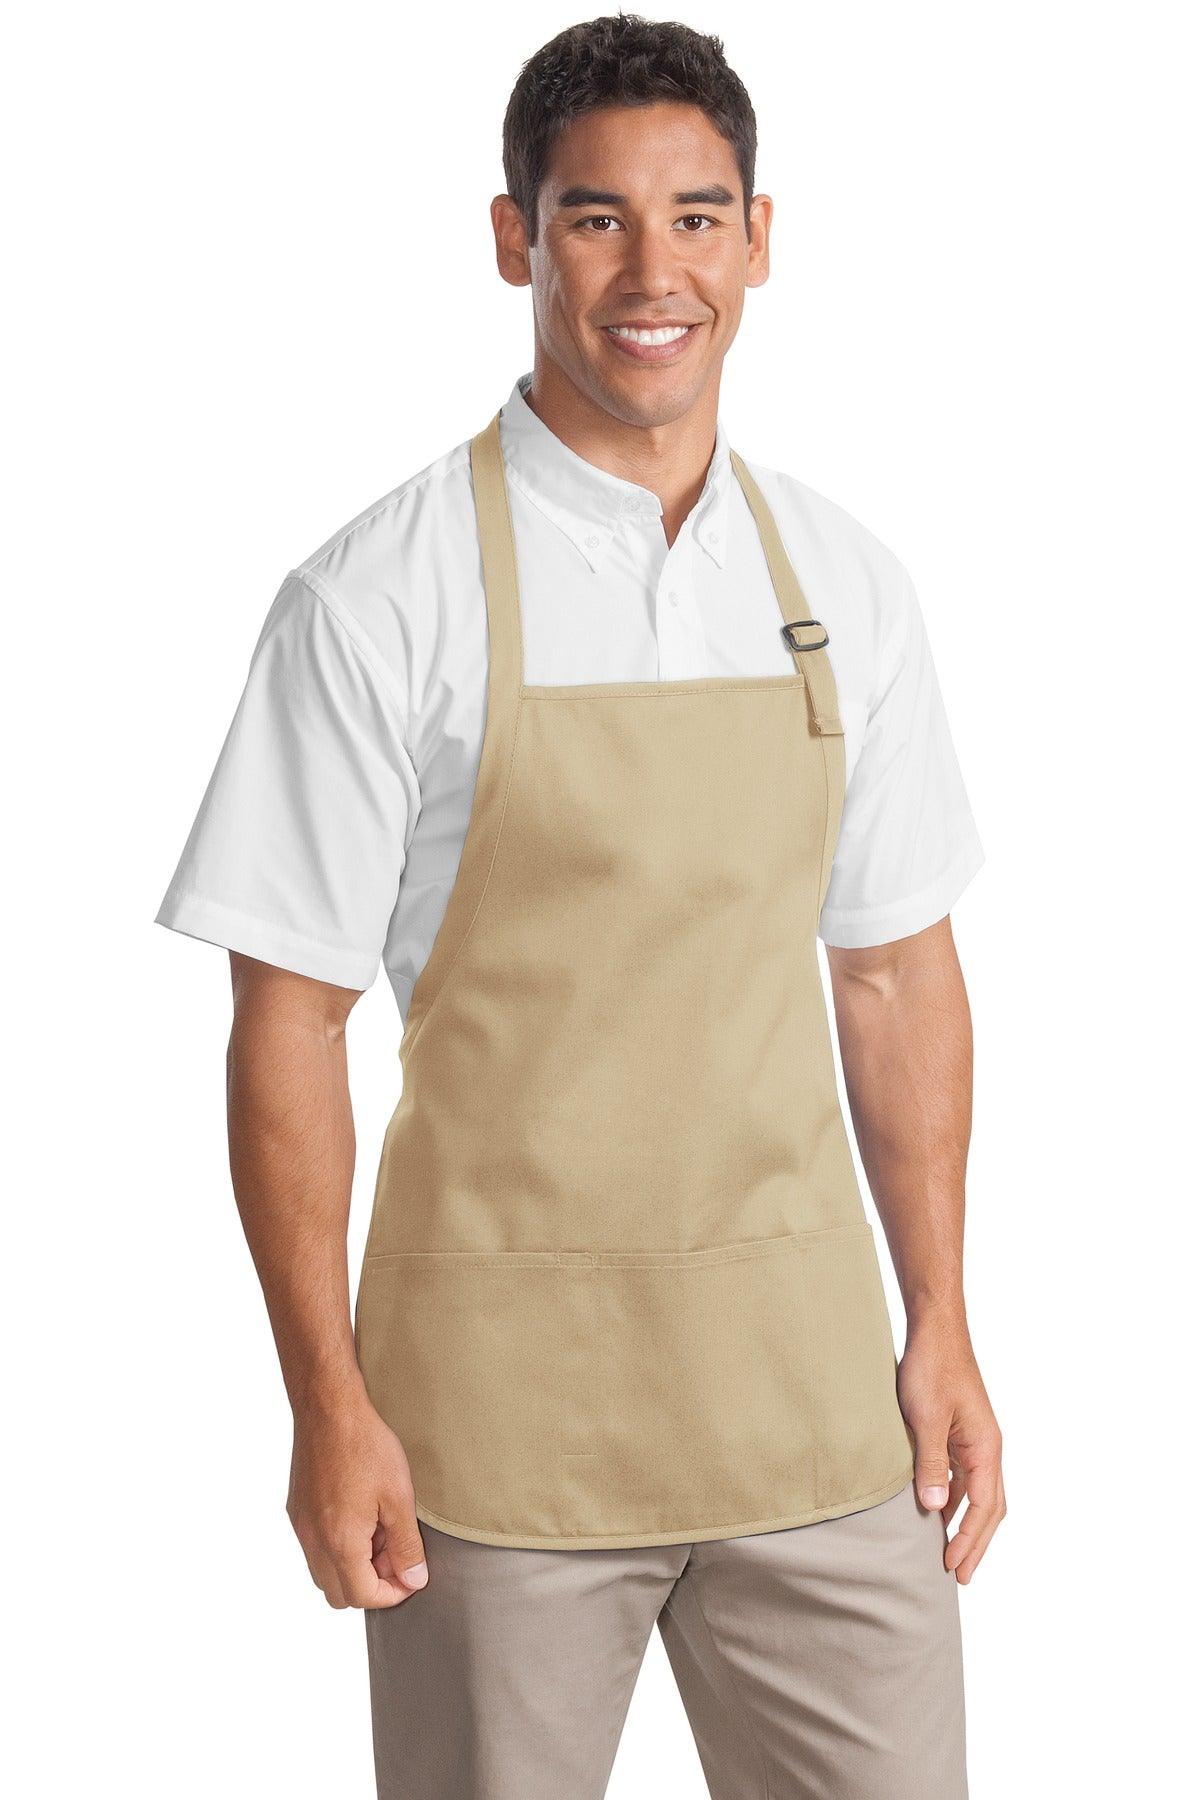 Port Authority Medium-Length Apron with Pouch Pockets. A510 - Dresses Max